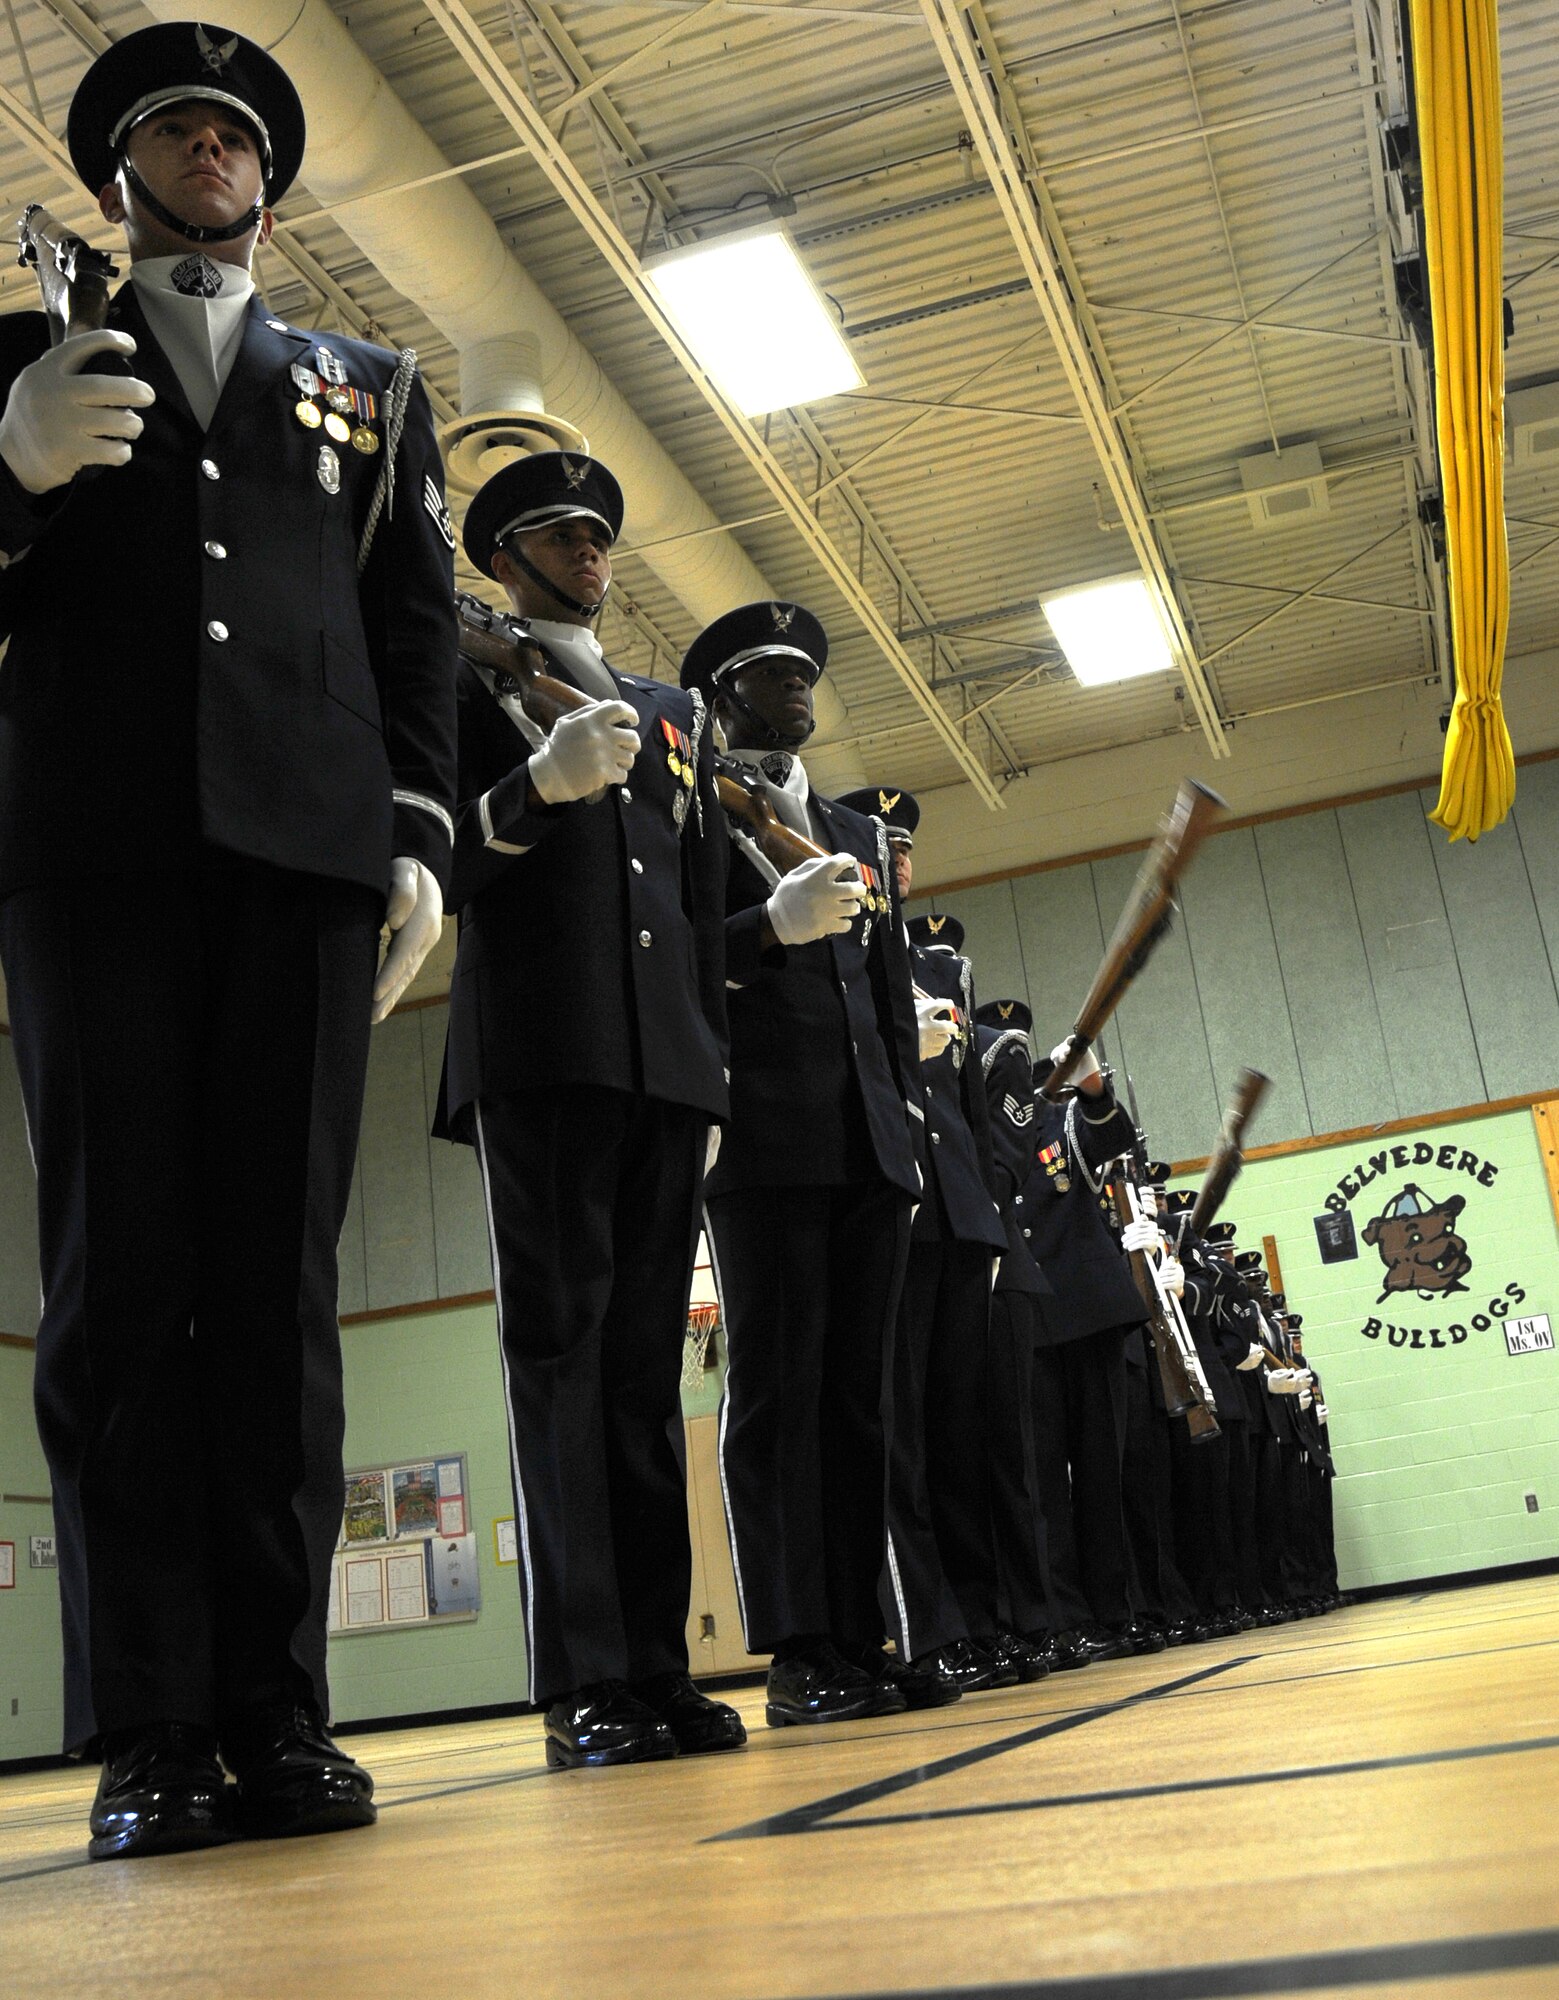 Members of the U.S. Air Force Honor Guard Drill Team sequentially spin their M-1 rifles during a performance at Belvedere Elementary School in Falls Church, Va., Nov. 26, 2012.   After the performance, Drill Team members and students planted trees at a plot of land near the school which the students are transforming into Belvedere Park.  (U.S. Air Force photo/Staff Sgt. Torey Griffith)